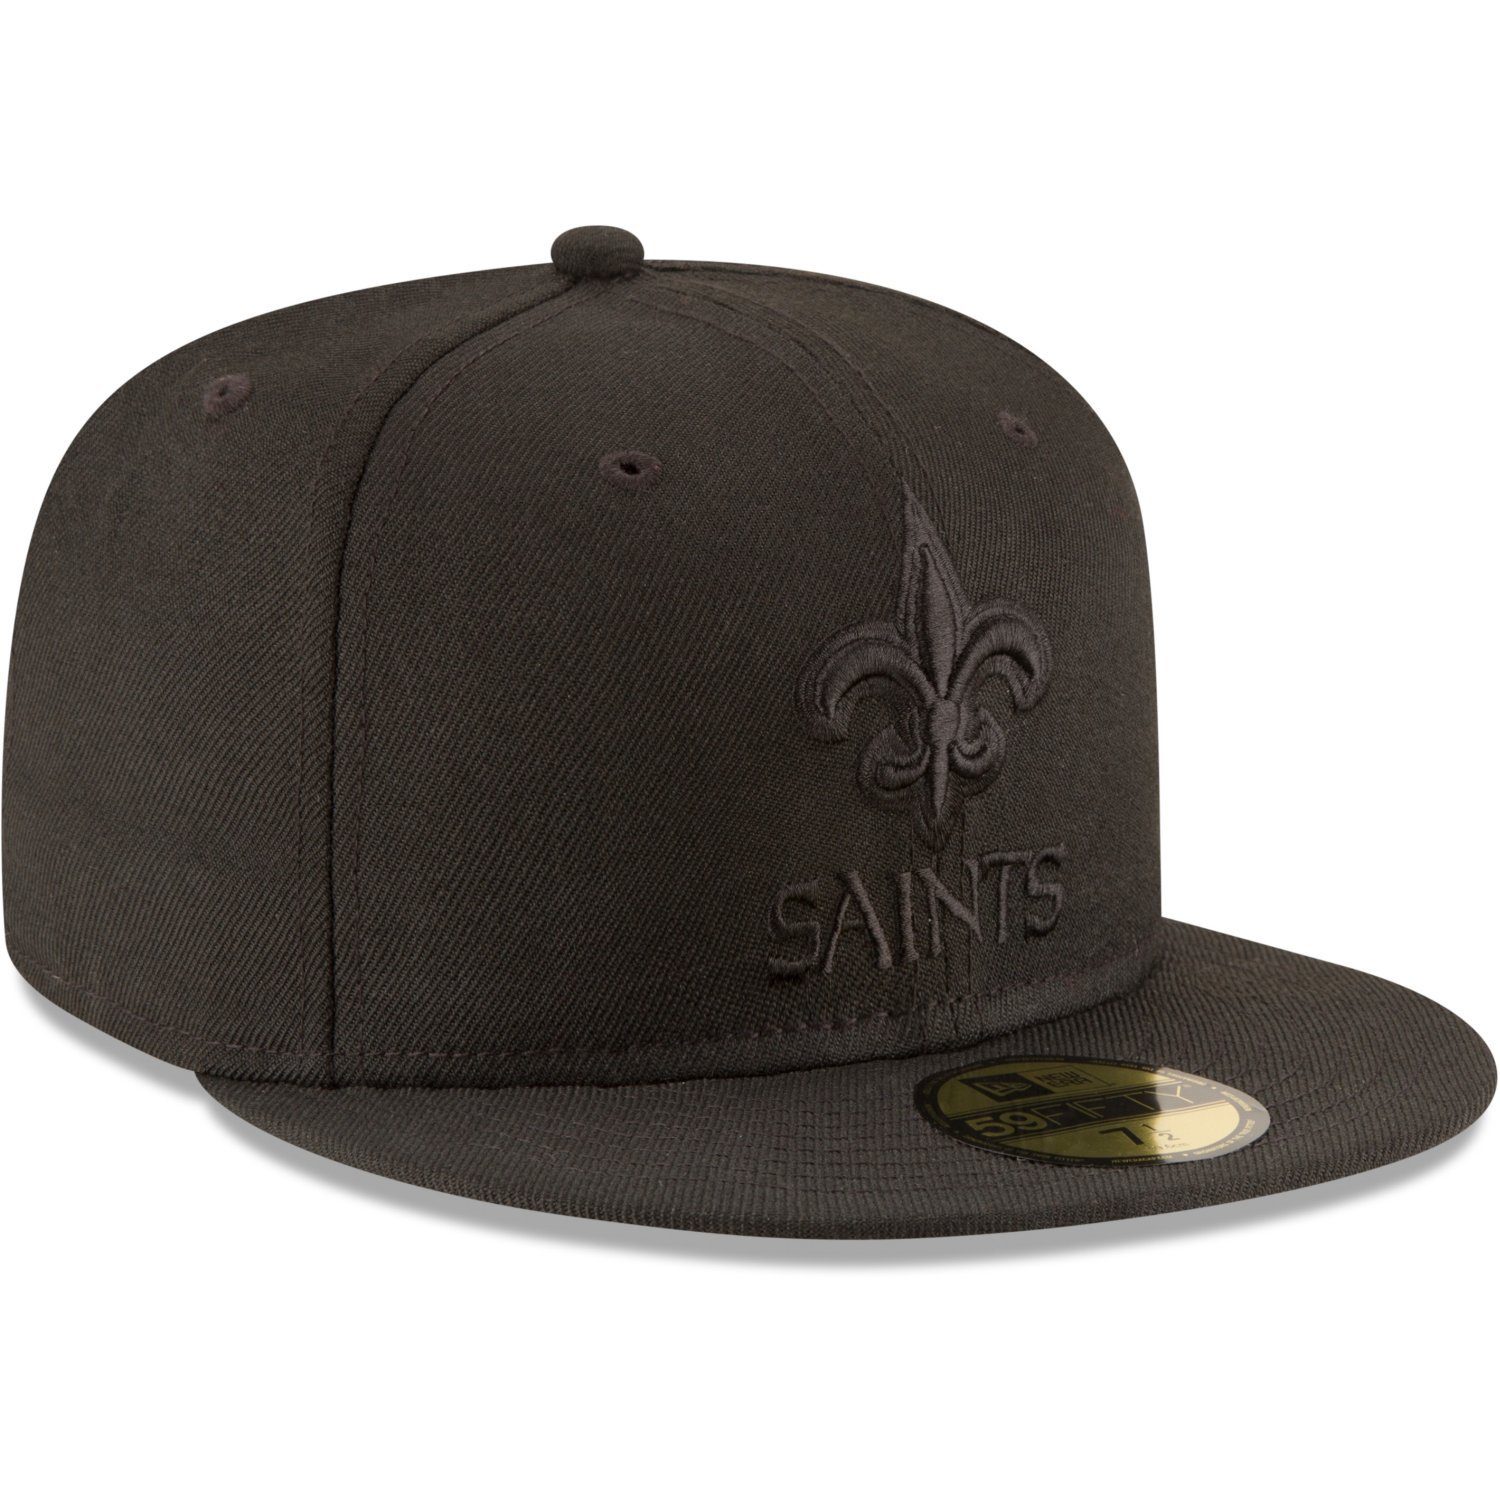 New Cap Orleans Saints NFL 59Fifty Fitted New Era